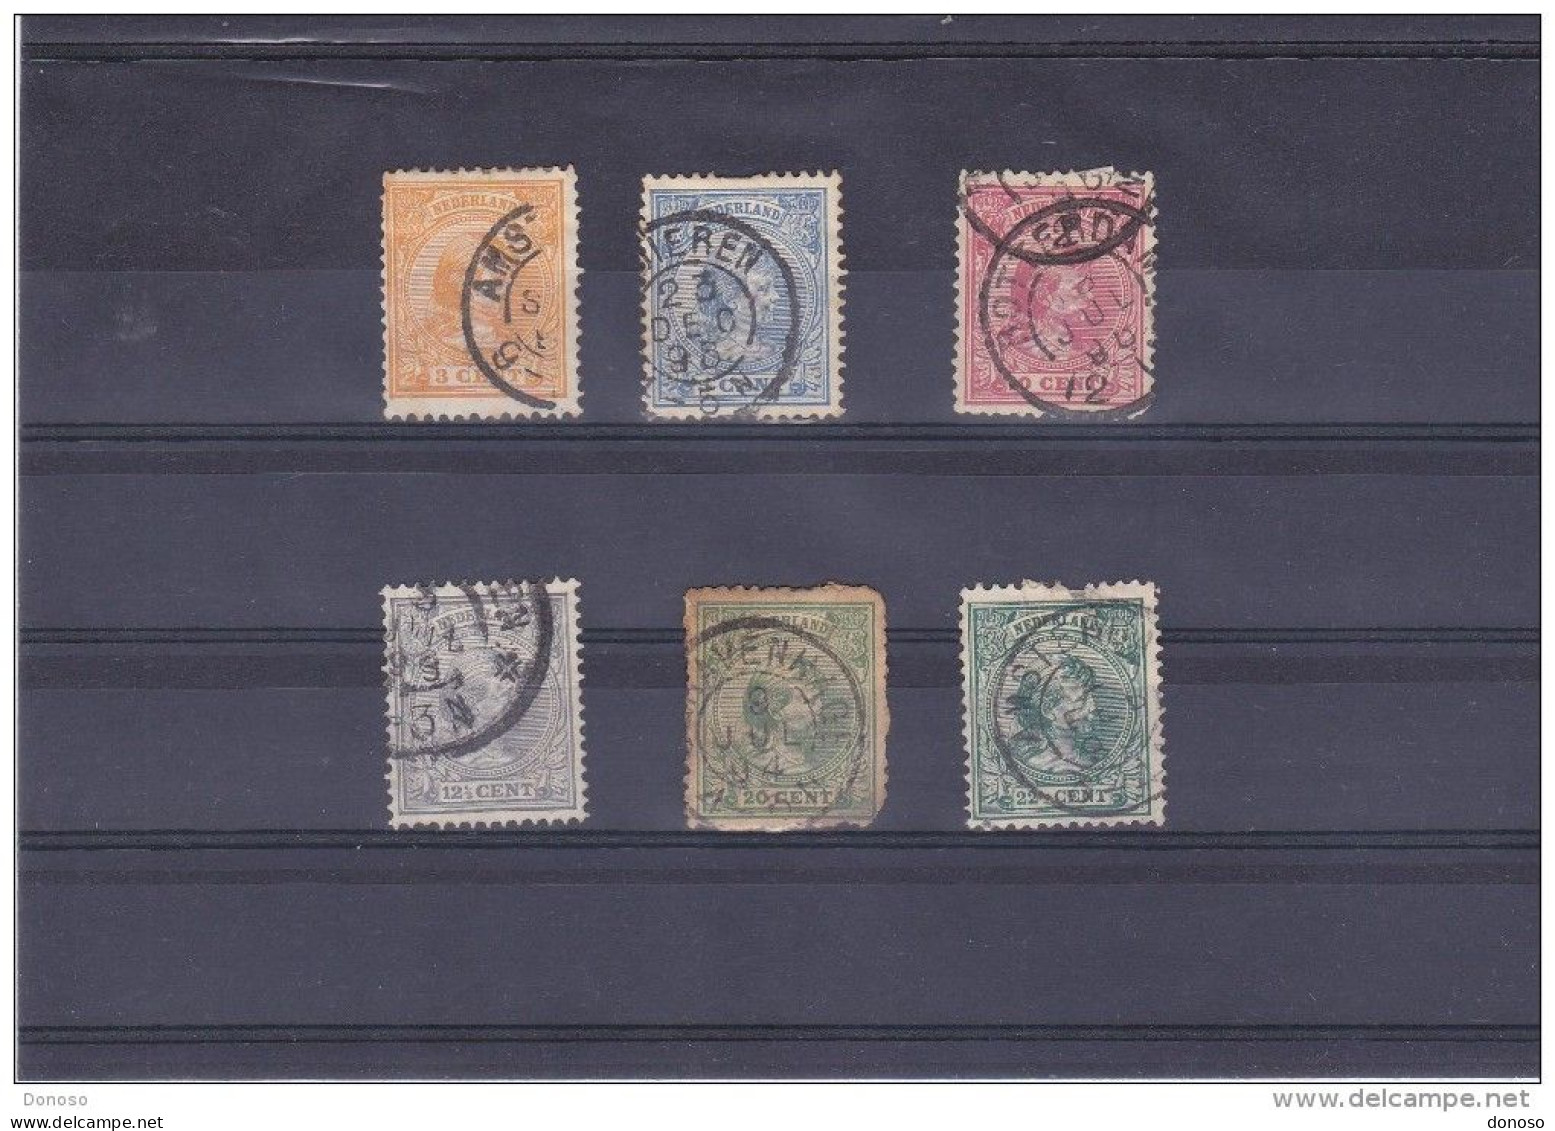 PAYS BAS 1891 Yvert 34-35 + 37-38 + 40-41 Oblitéré, Used  Cote : 26.80 Euros - Used Stamps